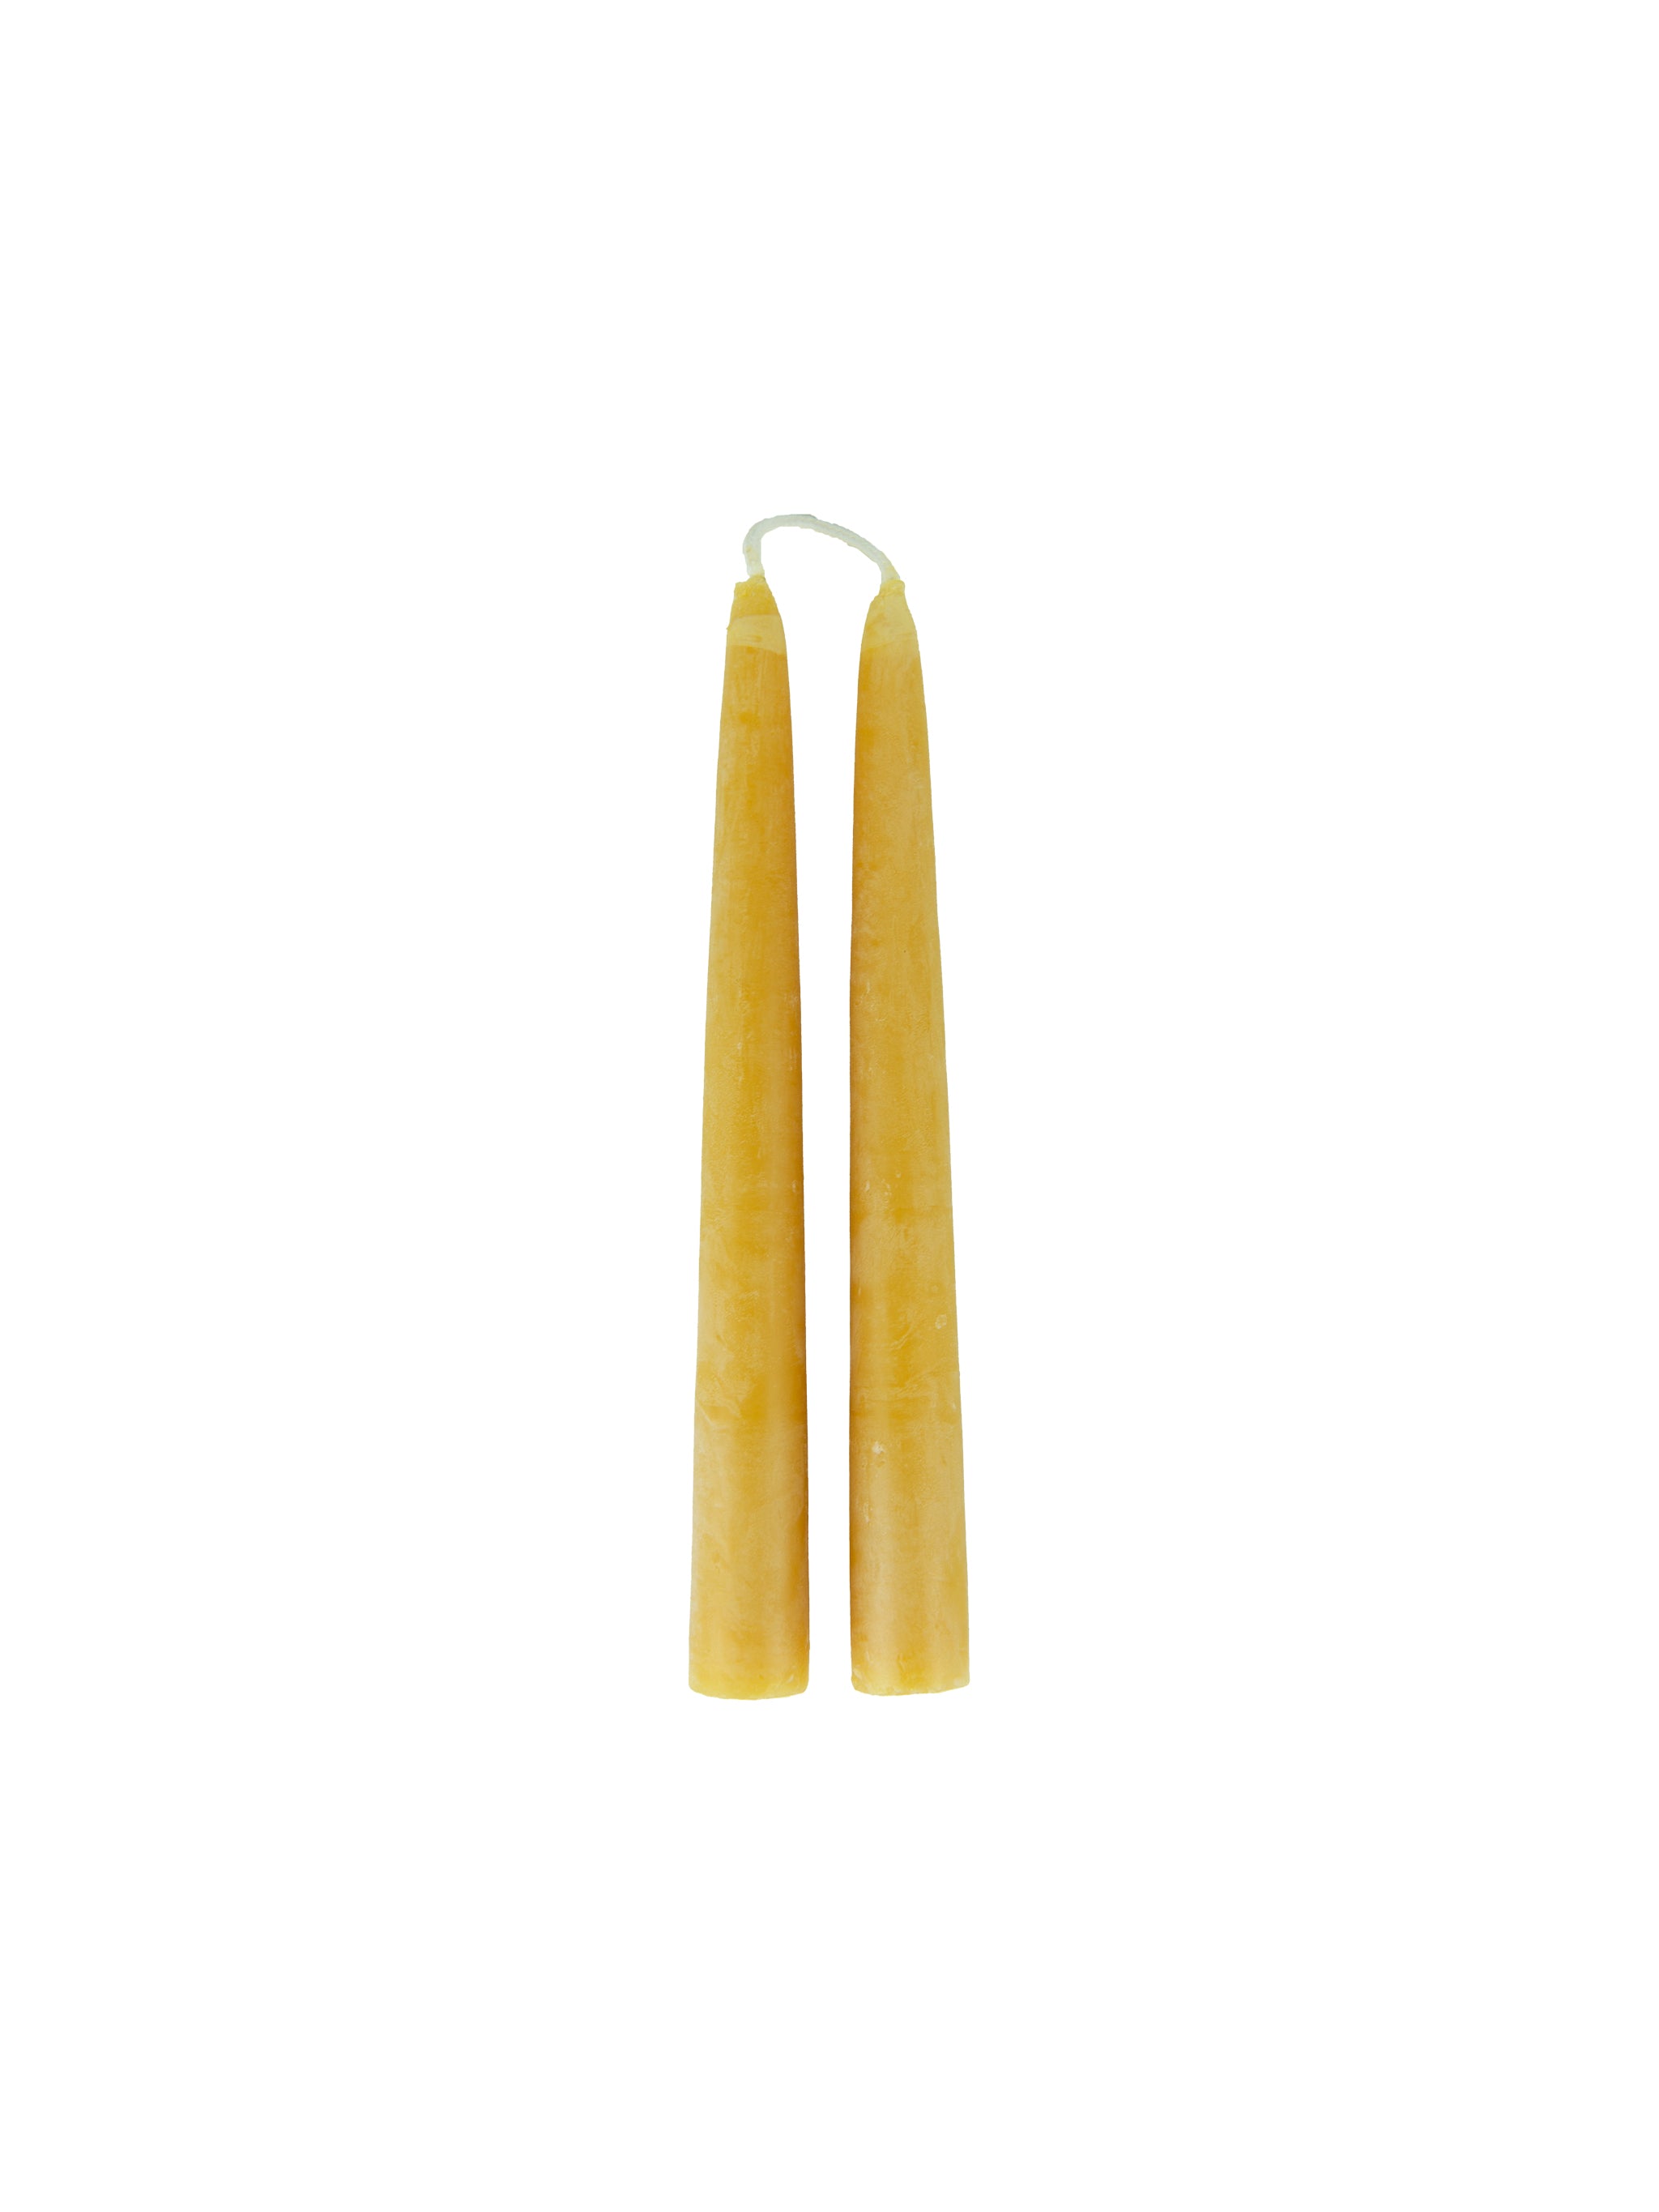 Shop the MATCH Pewter Beeswax Taper Candles at Weston Table